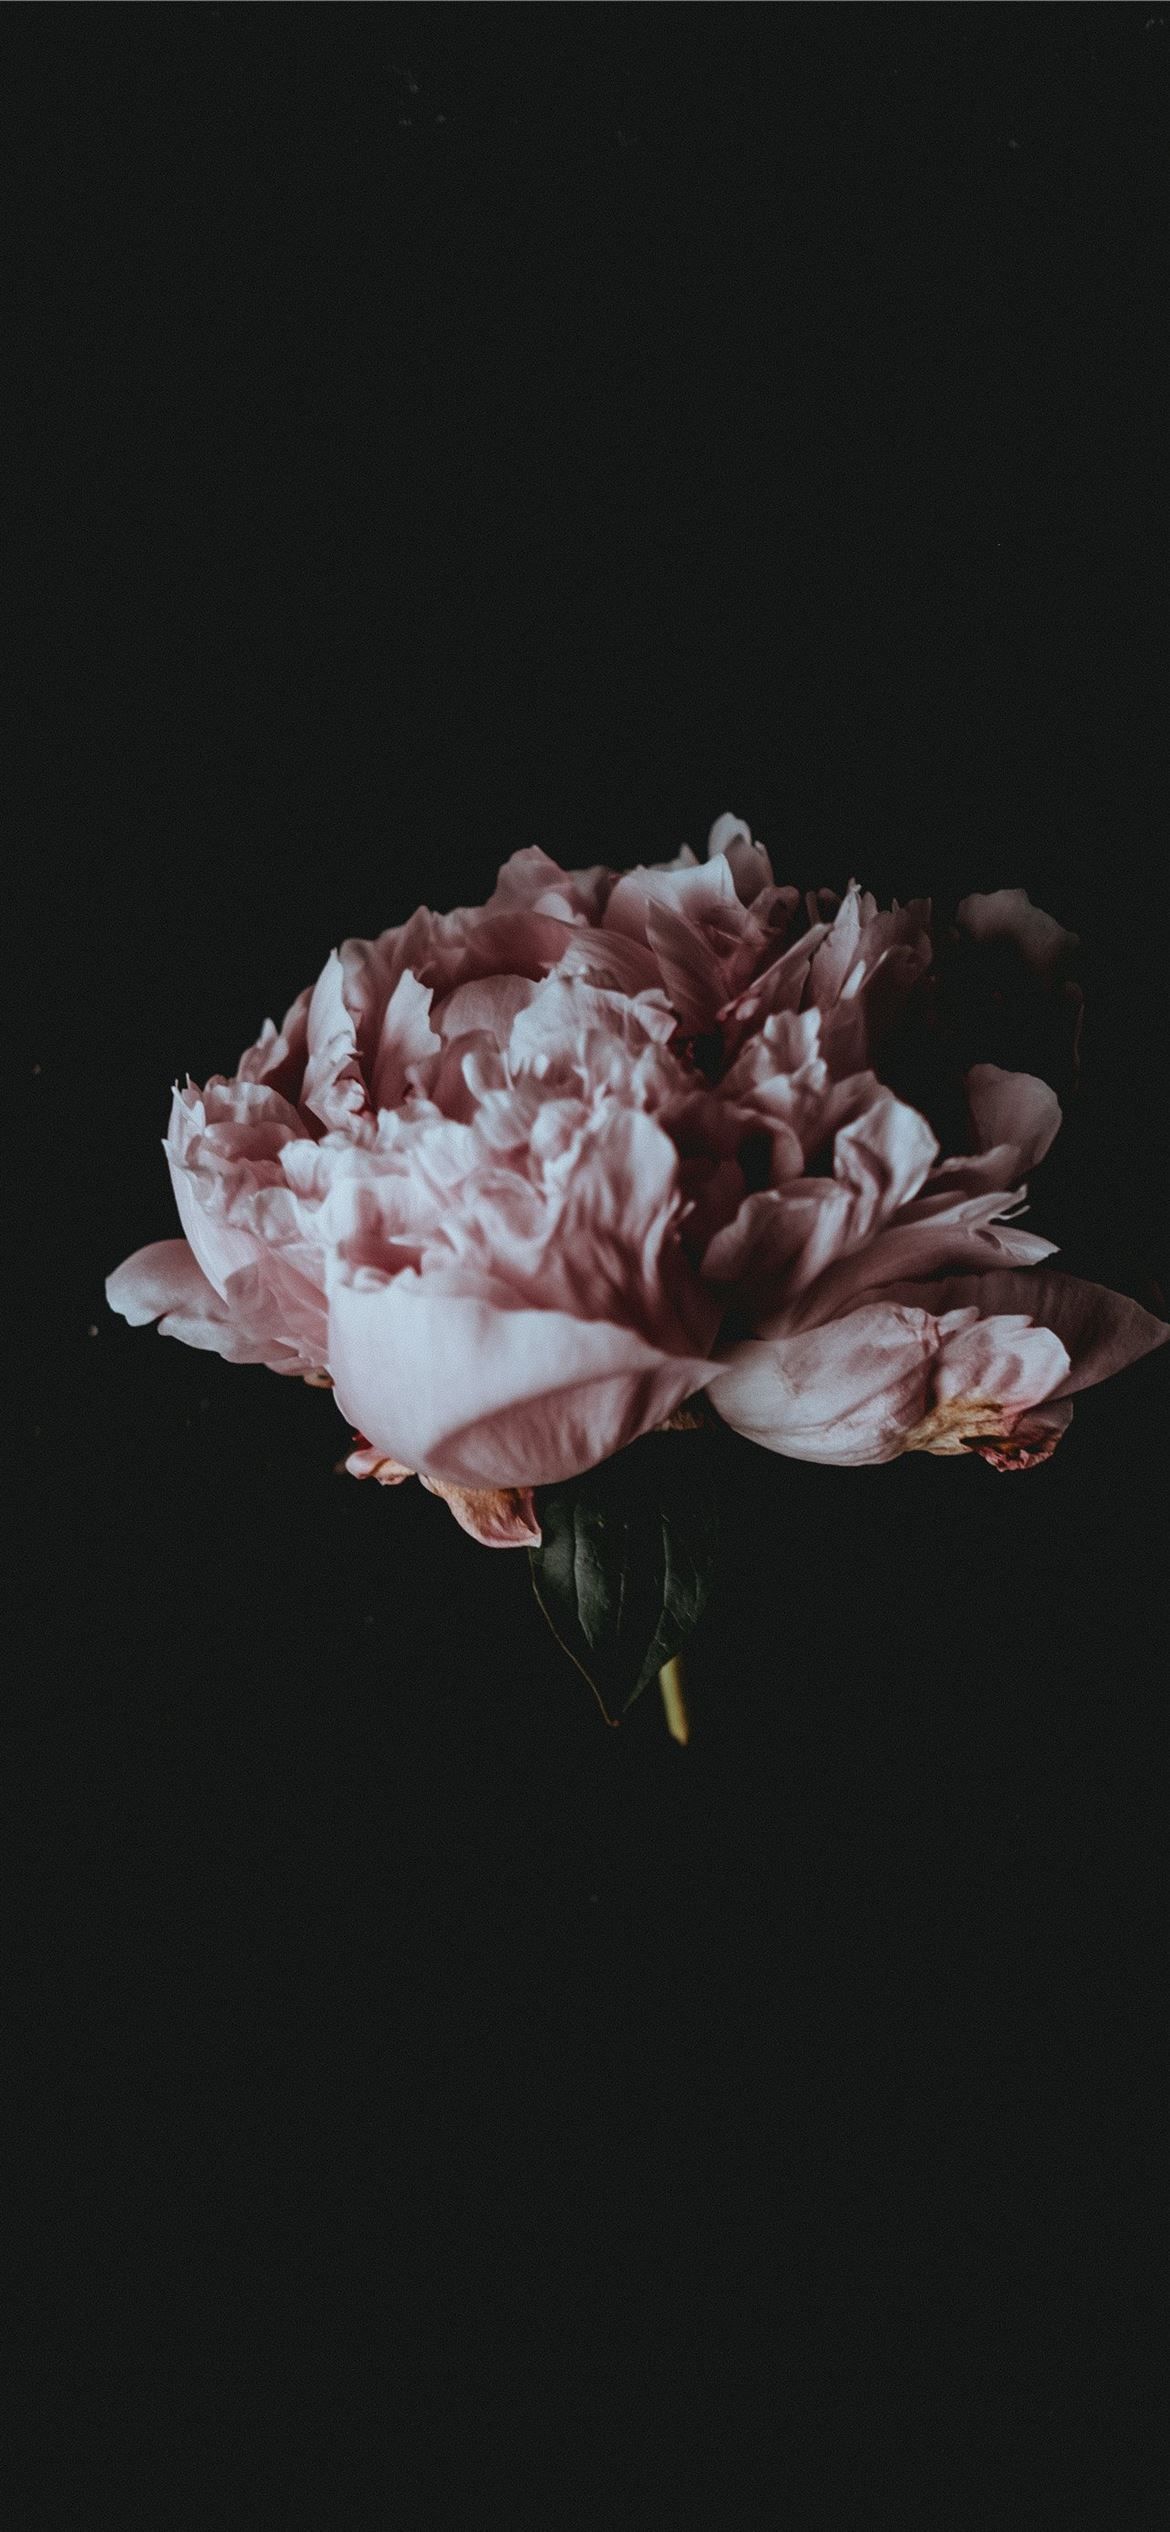 Peony flower in a vase on a black background - Flower